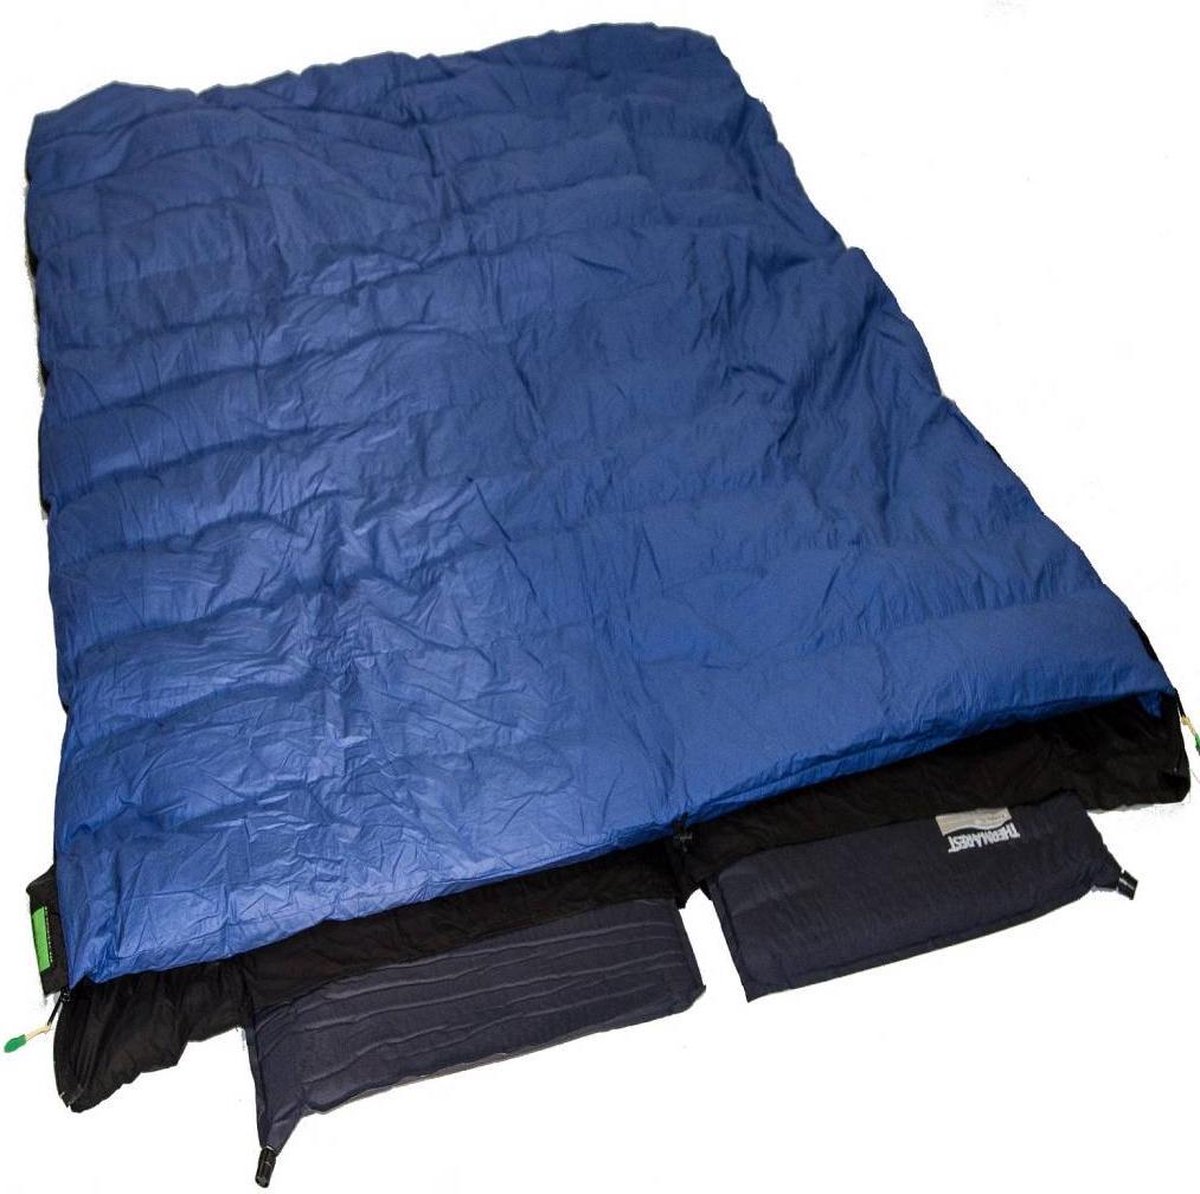 Lowland Duo Iso Hoes - Lakenzak Extra - Thermarest - 2 Persoons | bol.com